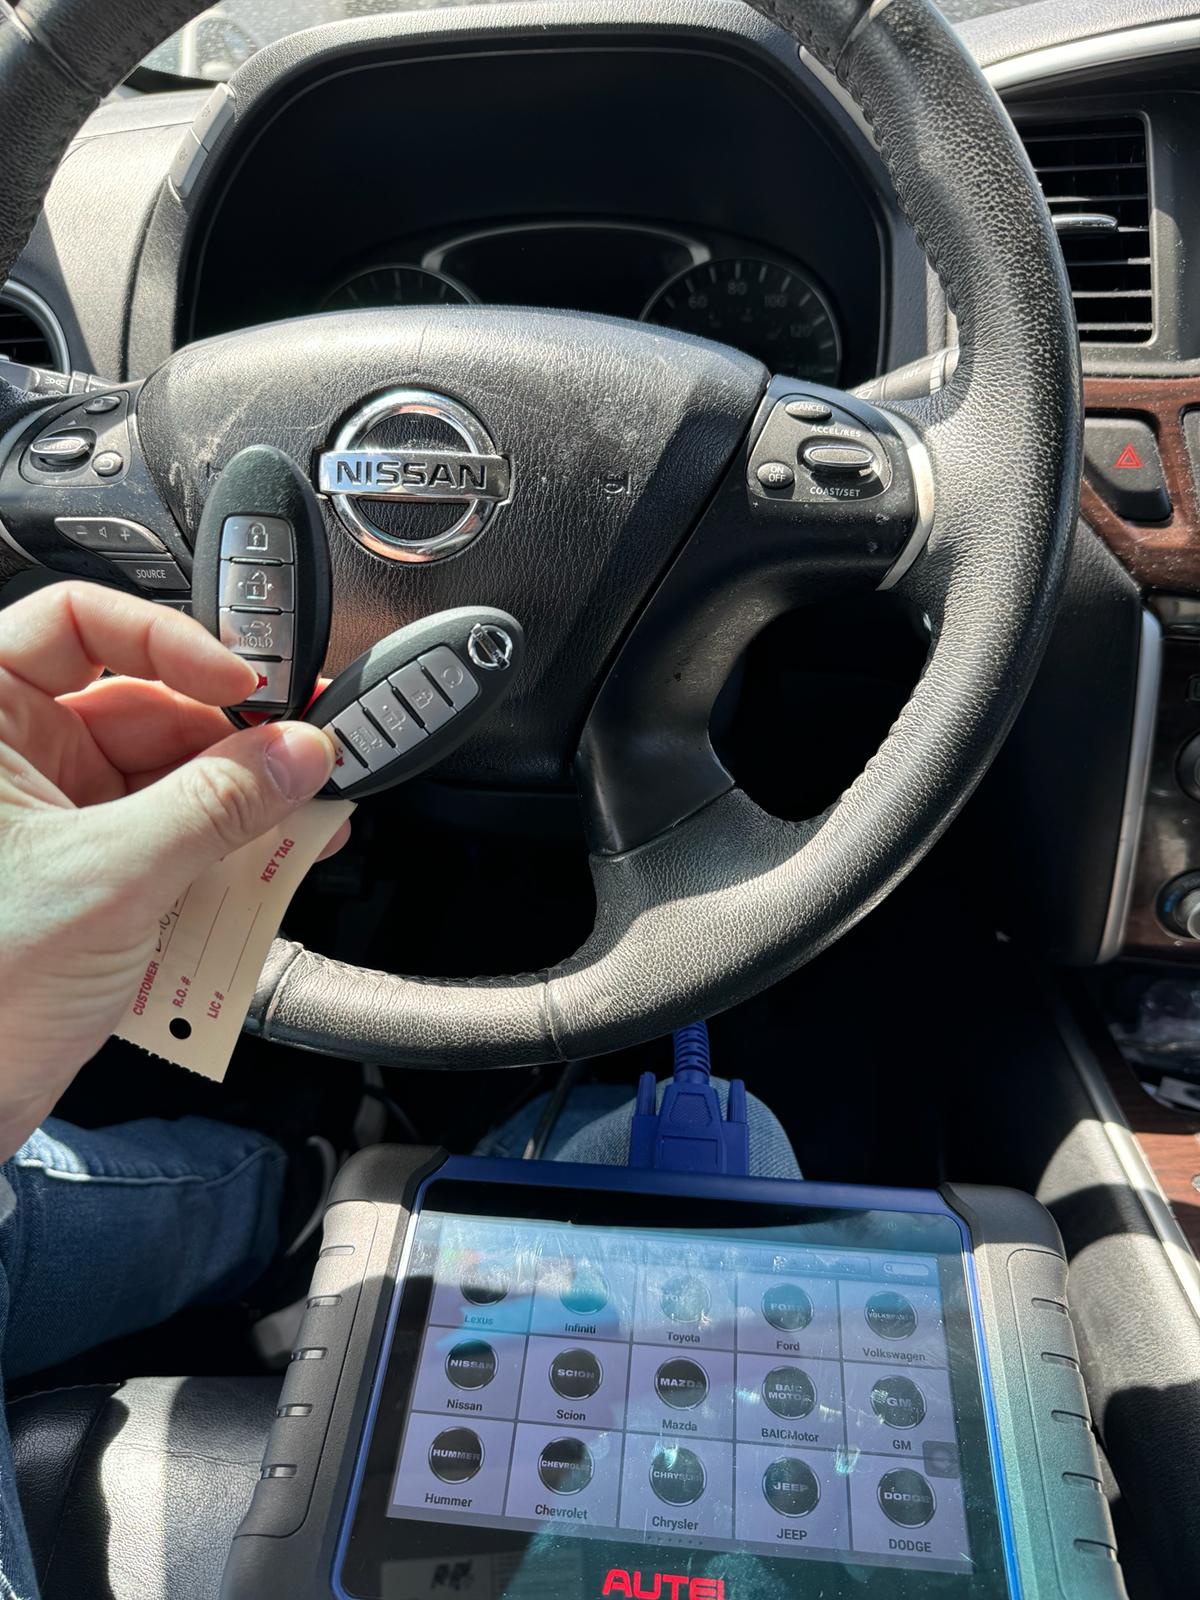 Denver Car Key Replacement: Why DIY Isn't Always the Answer